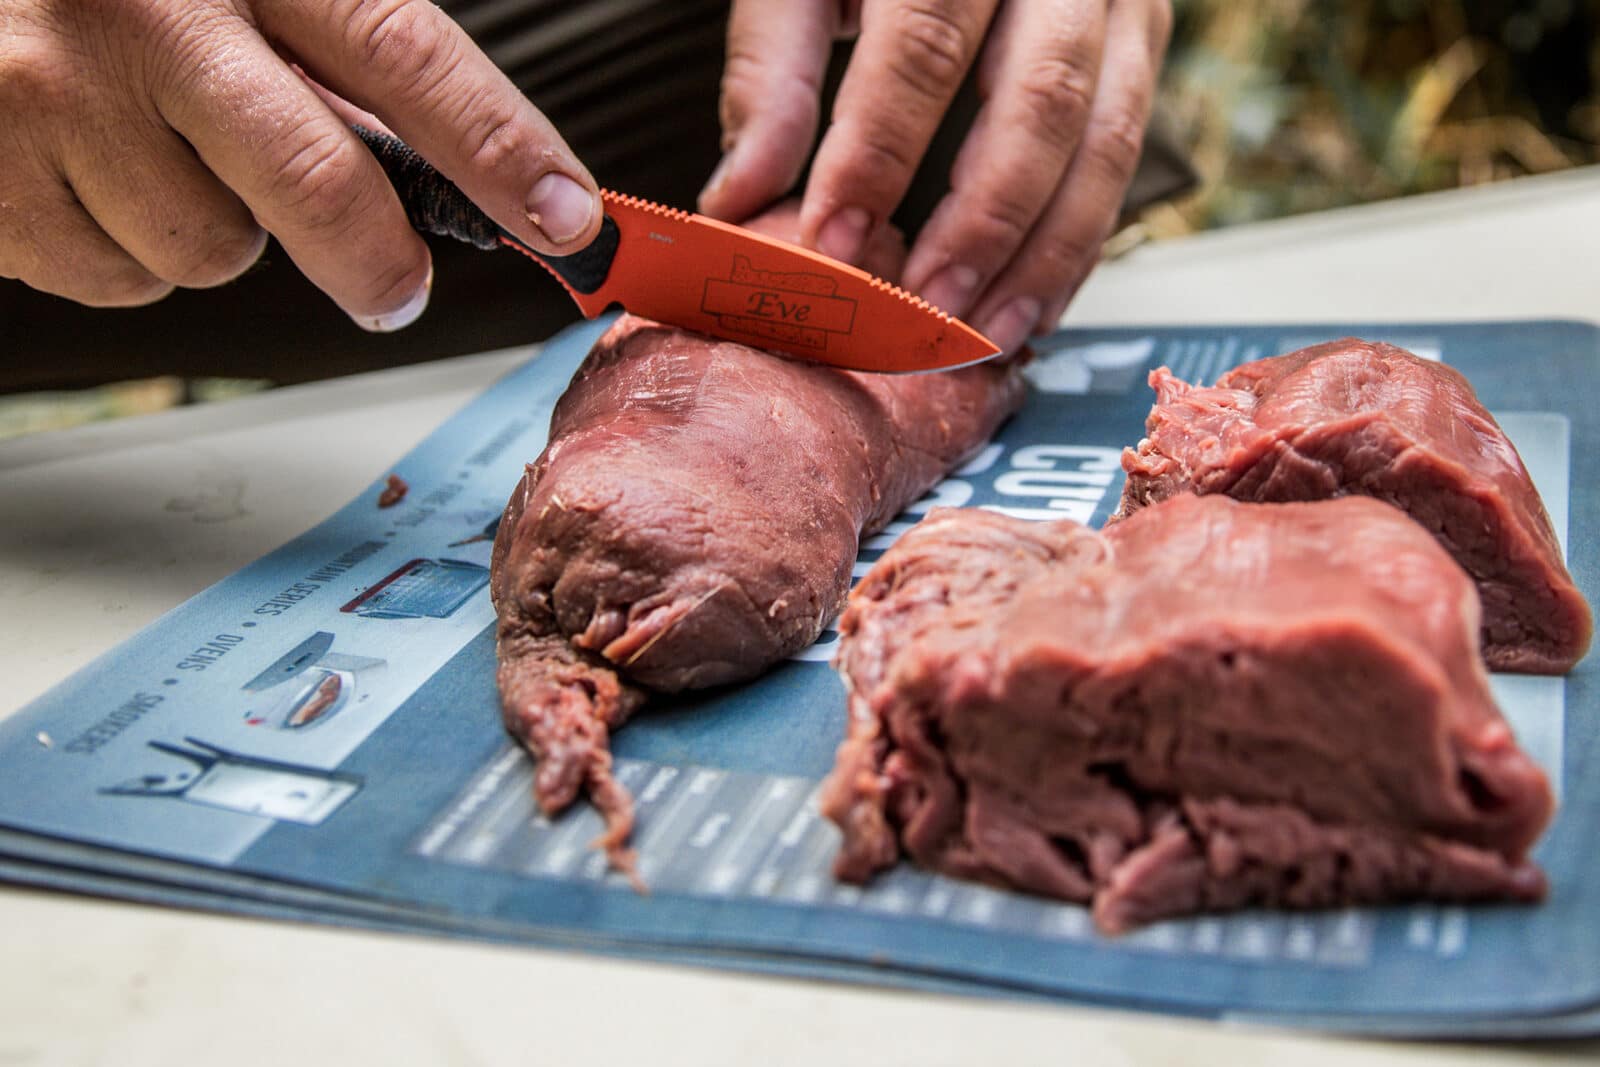 Hands using an orange knife to cut into wild game meat.